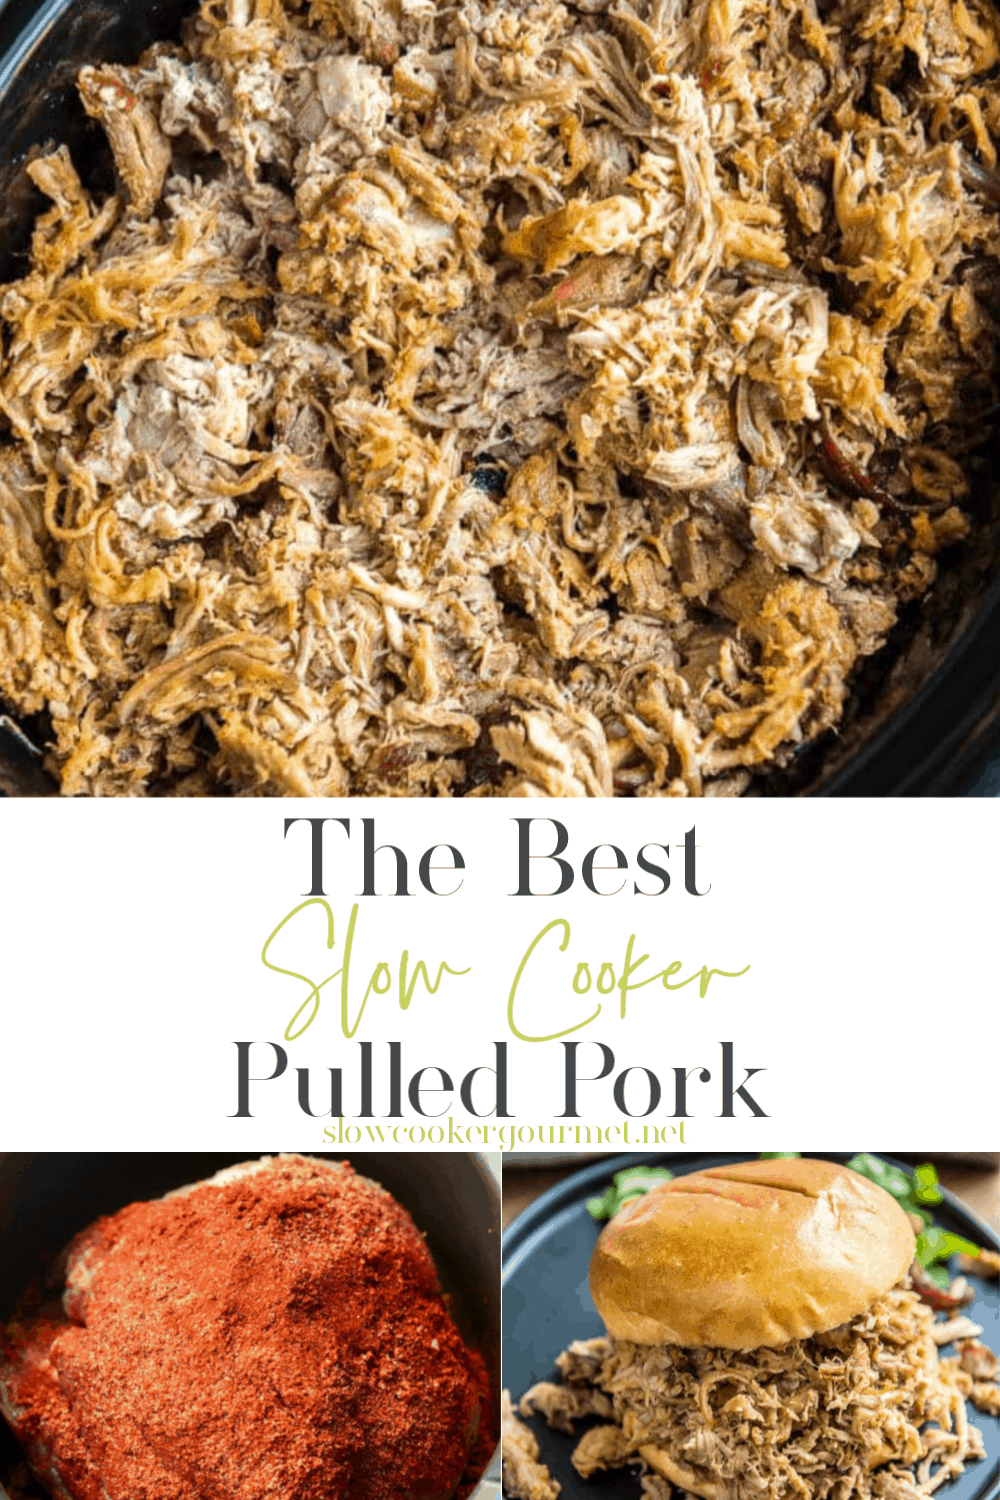 The Best Slow Cooker Pulled Pork - Slow Cooker Gourmet